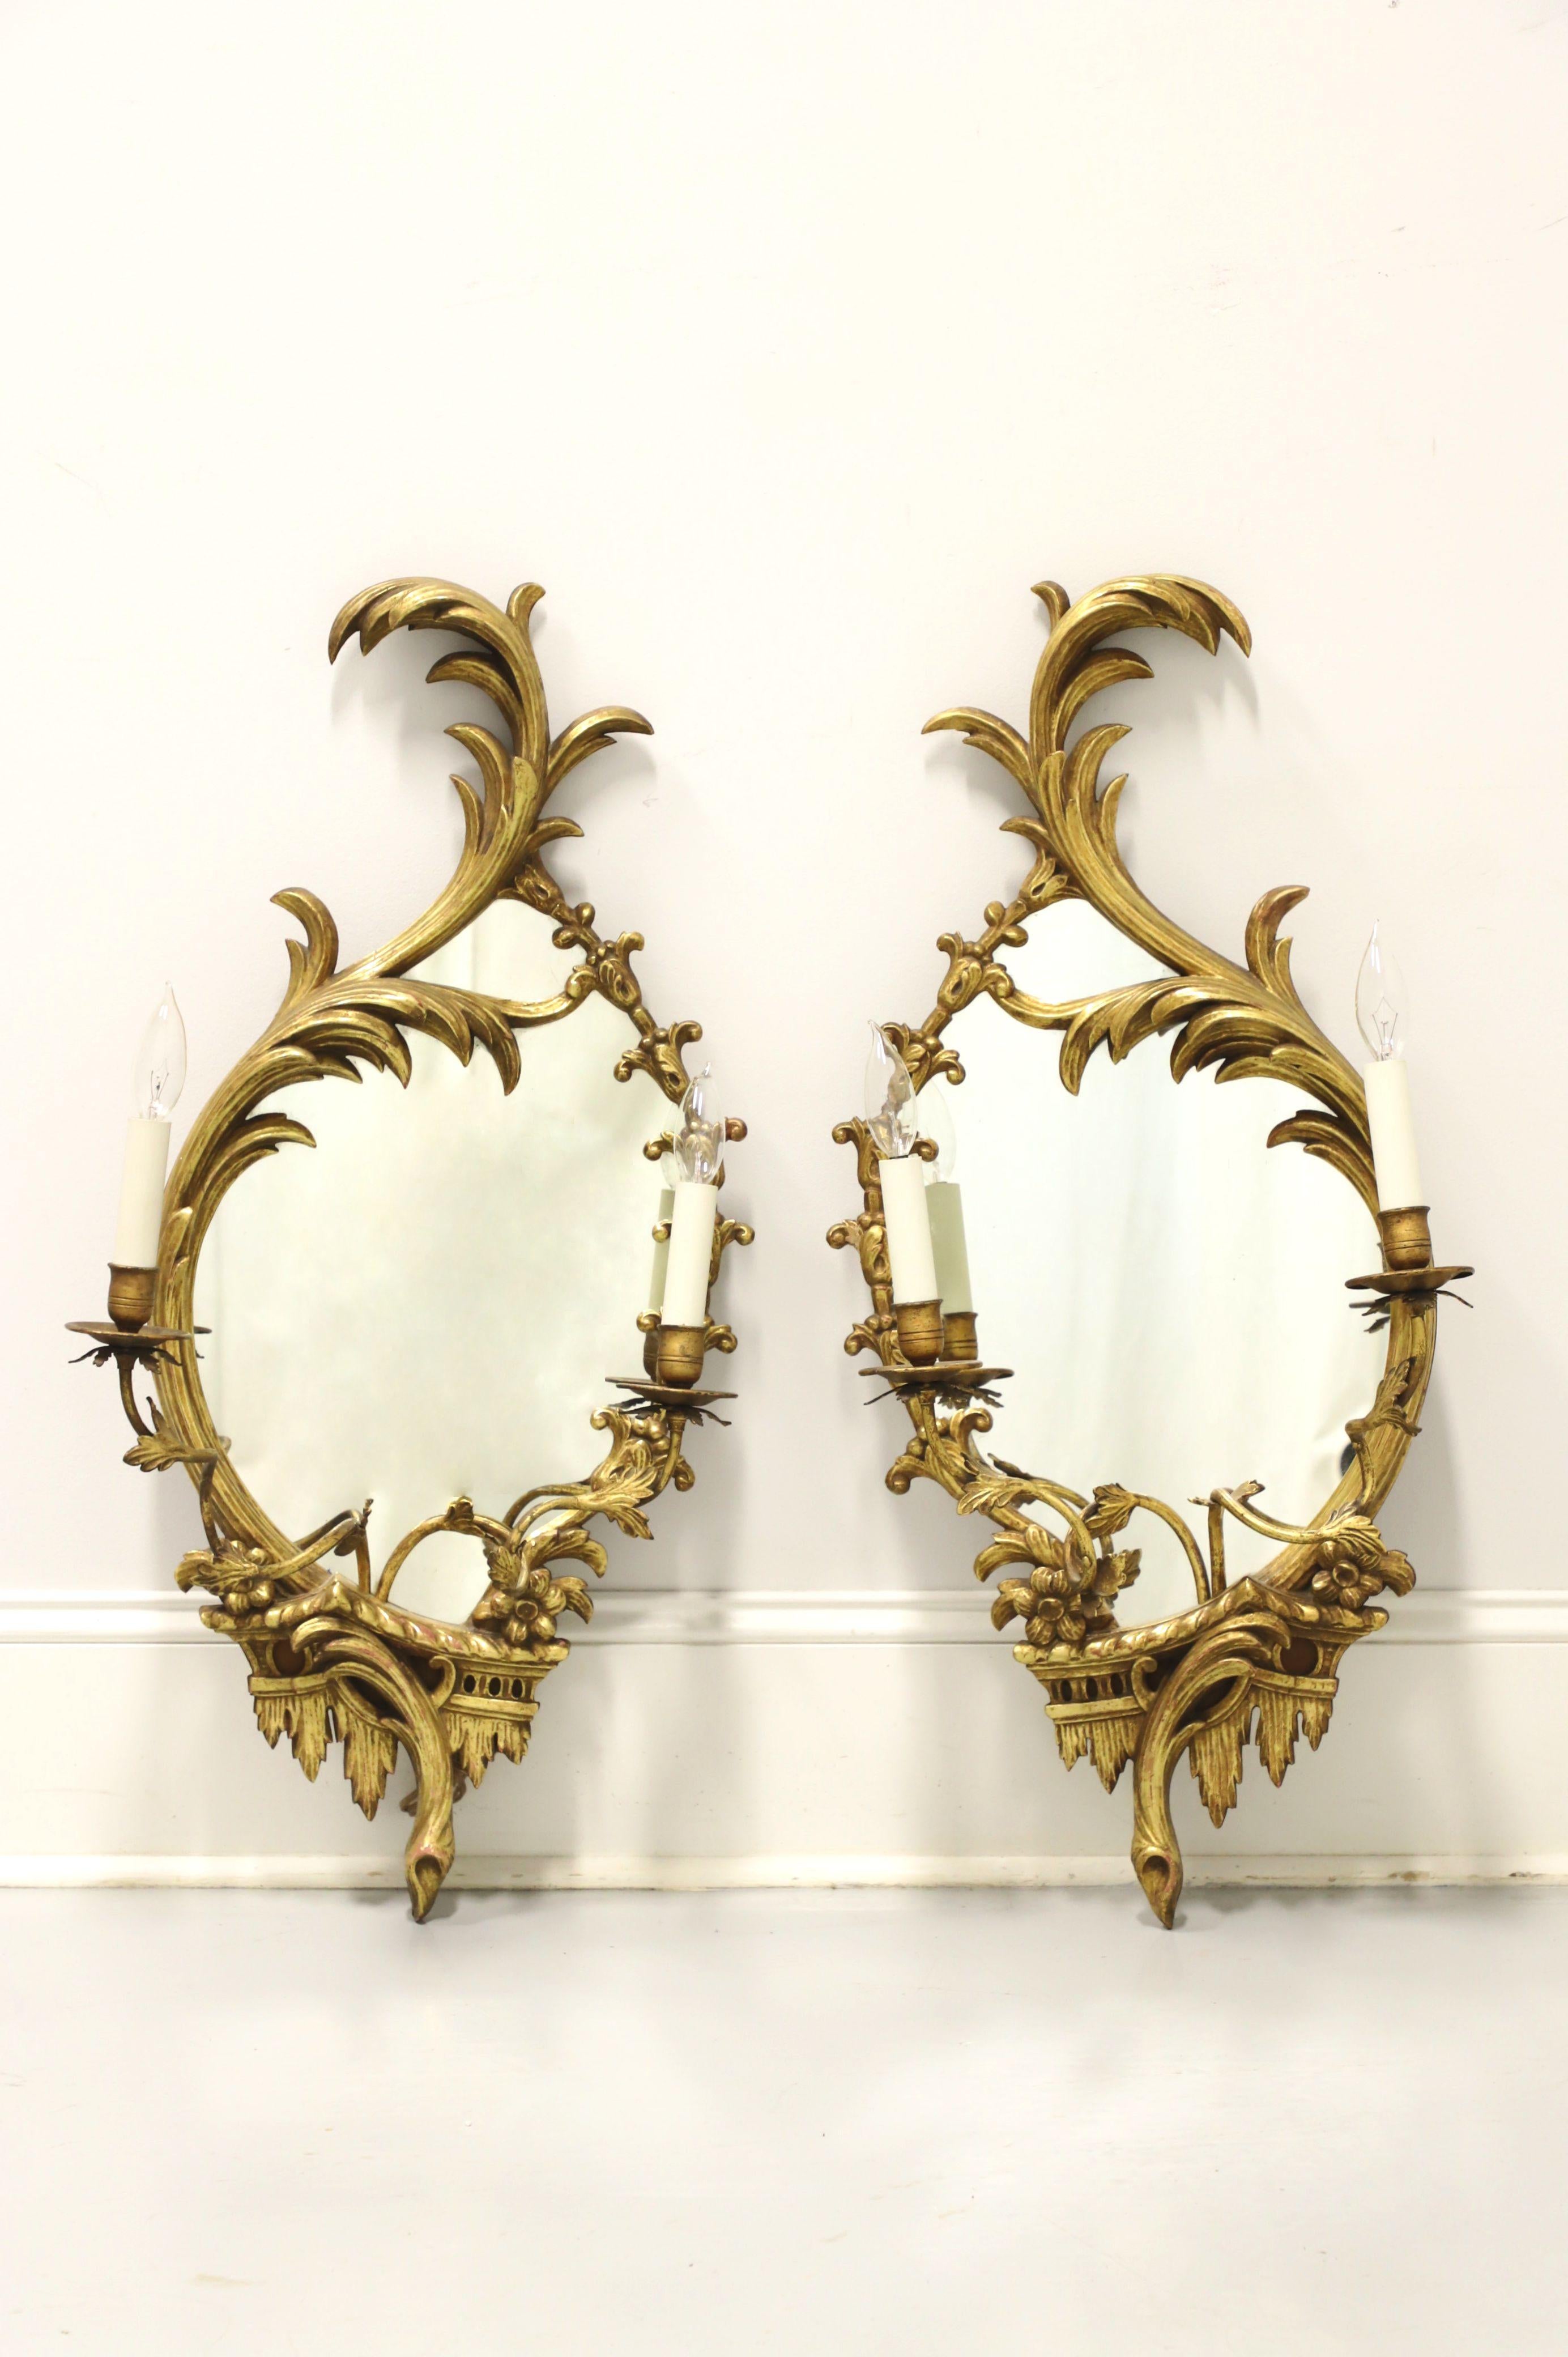 Early 20th Century Carved Wood Electrified Candle Mirror Wall Sconces - Pair B 6